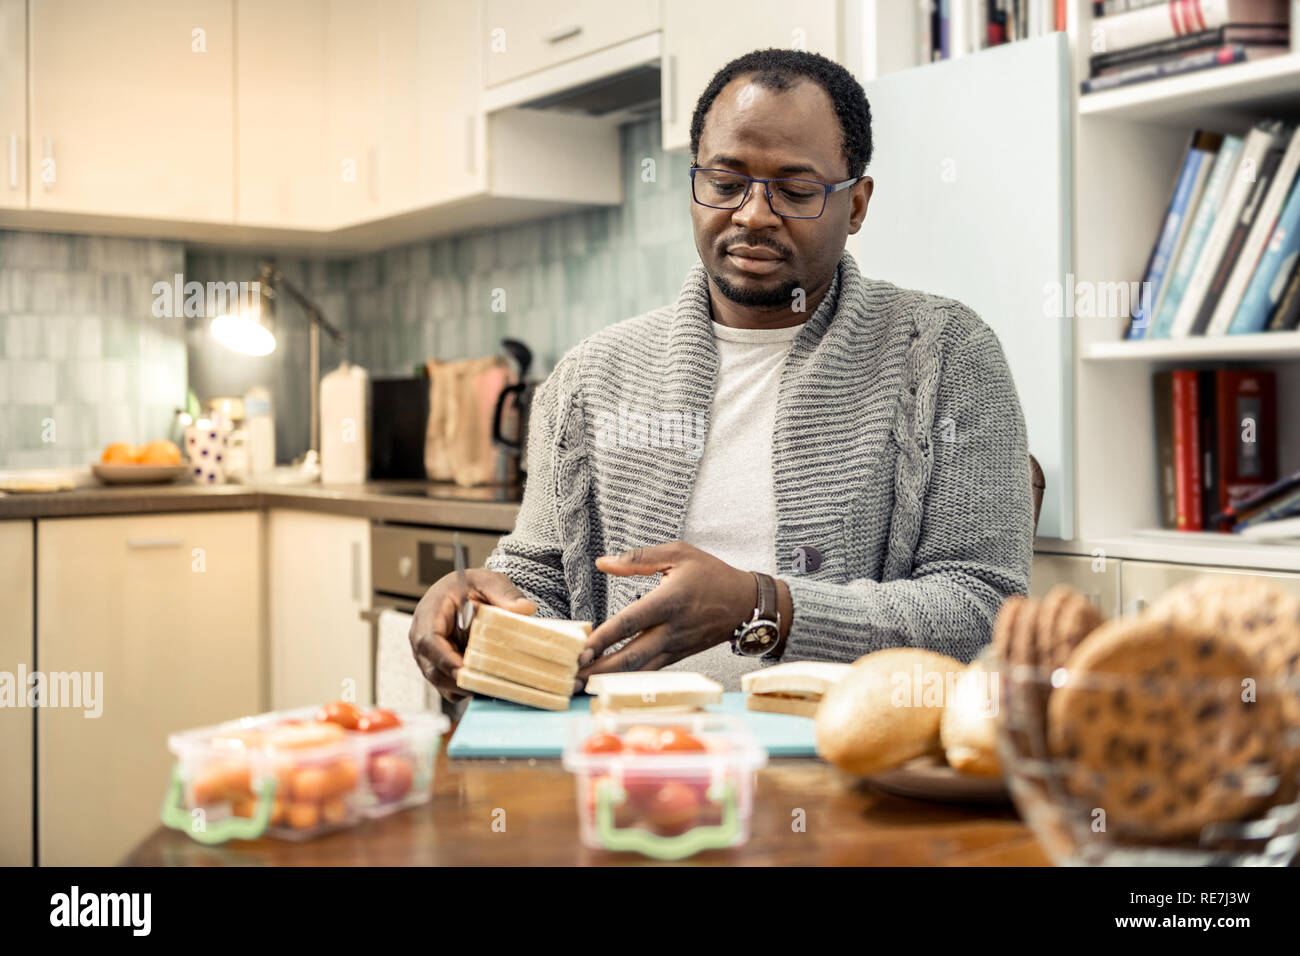 Caring father wearing glasses cooking sandwiches for family trip Stock Photo